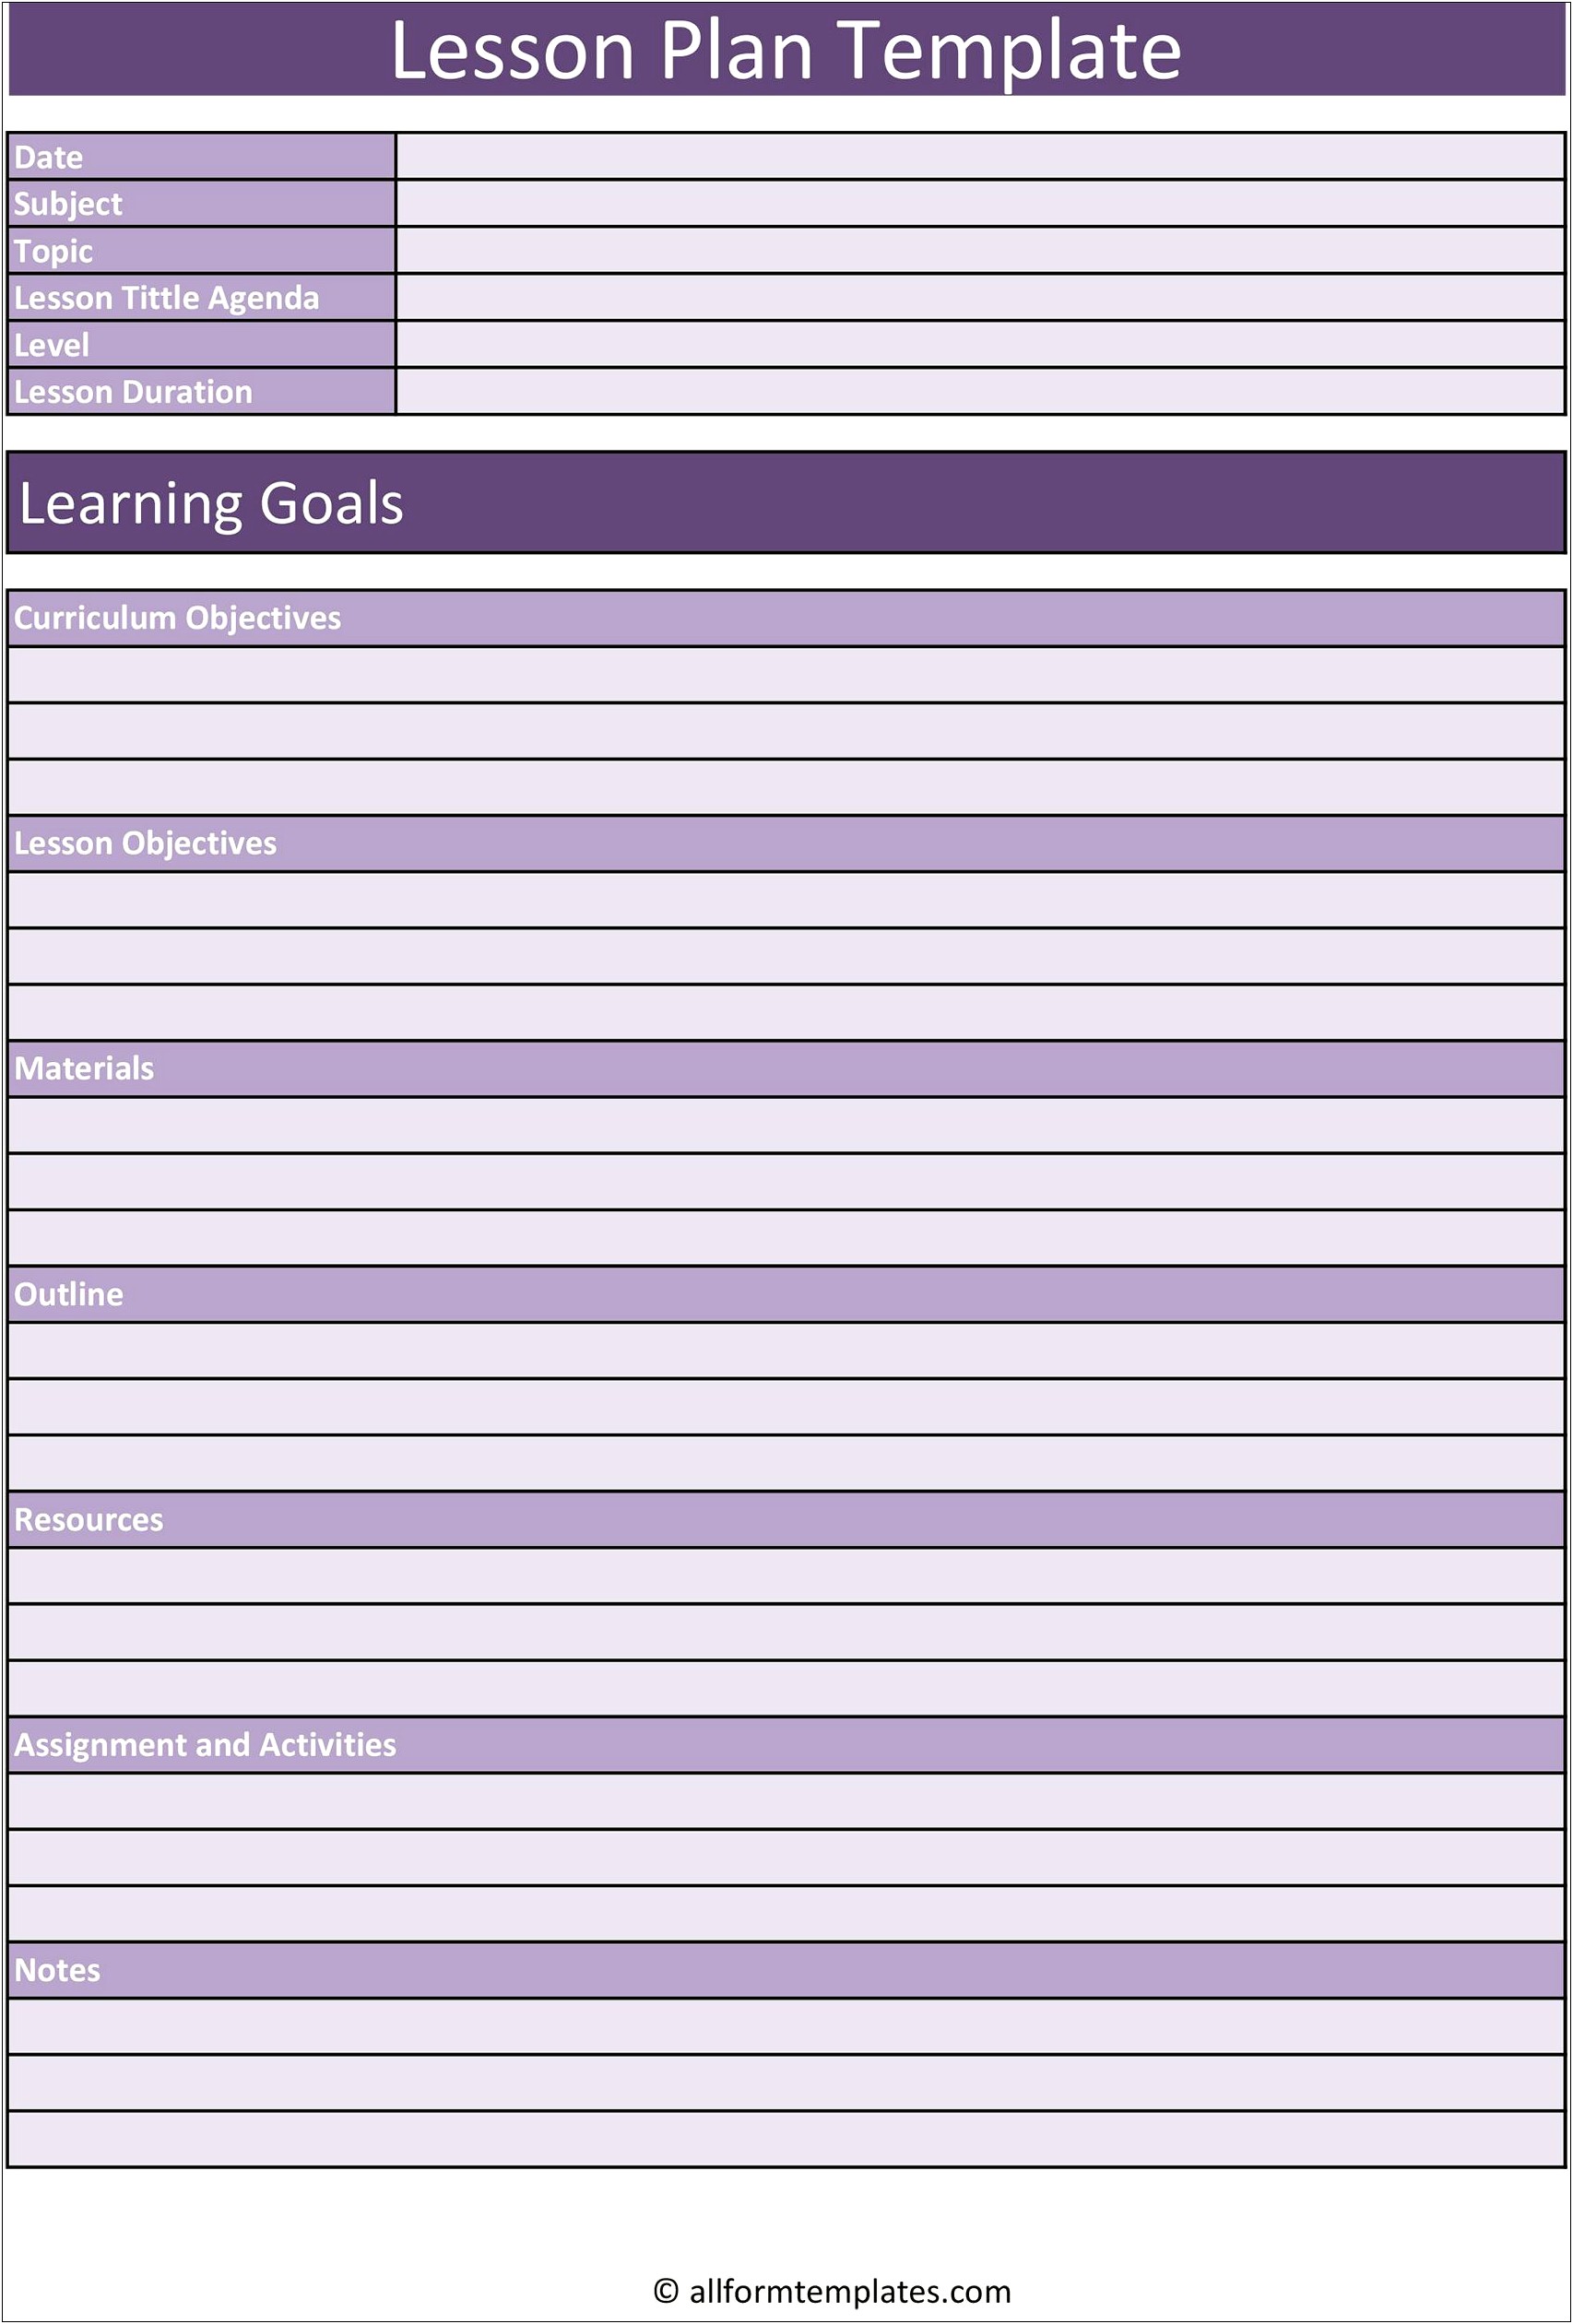 Daily Lesson Plan Template Microsoft Word